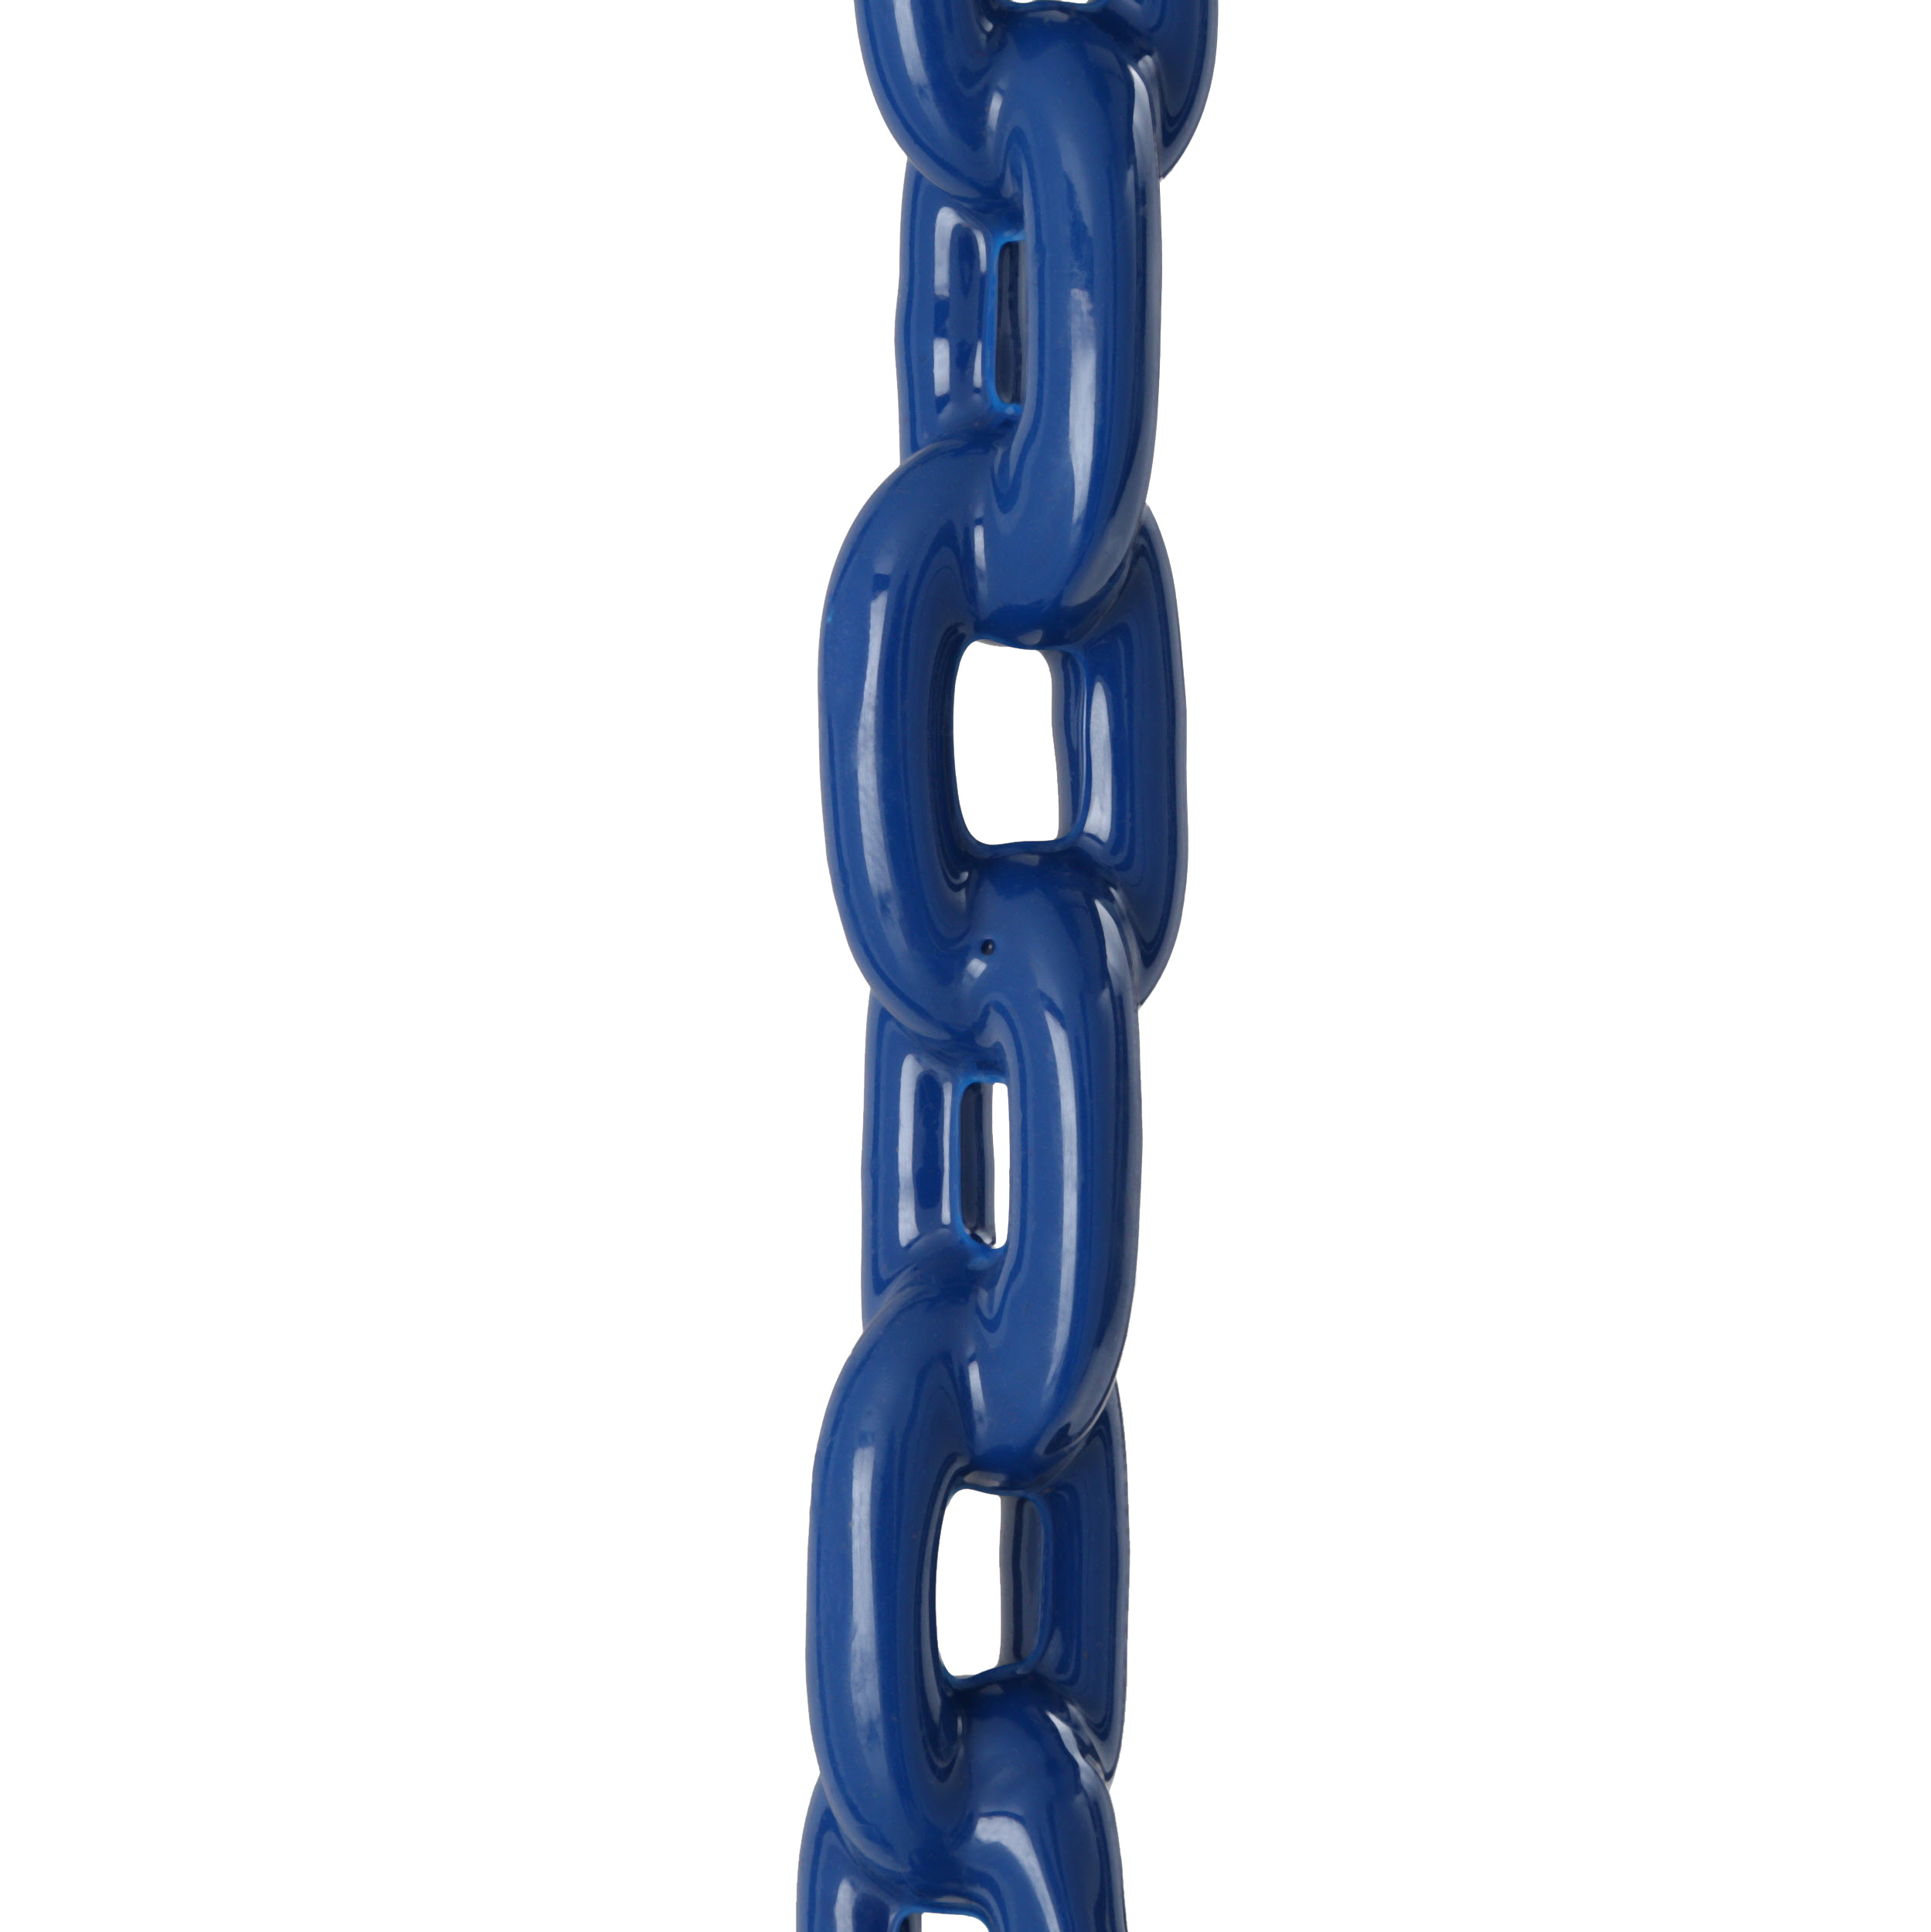 Gorilla Playsets Deluxe Swing Belt - Blue with Blue Chains - image 3 of 5